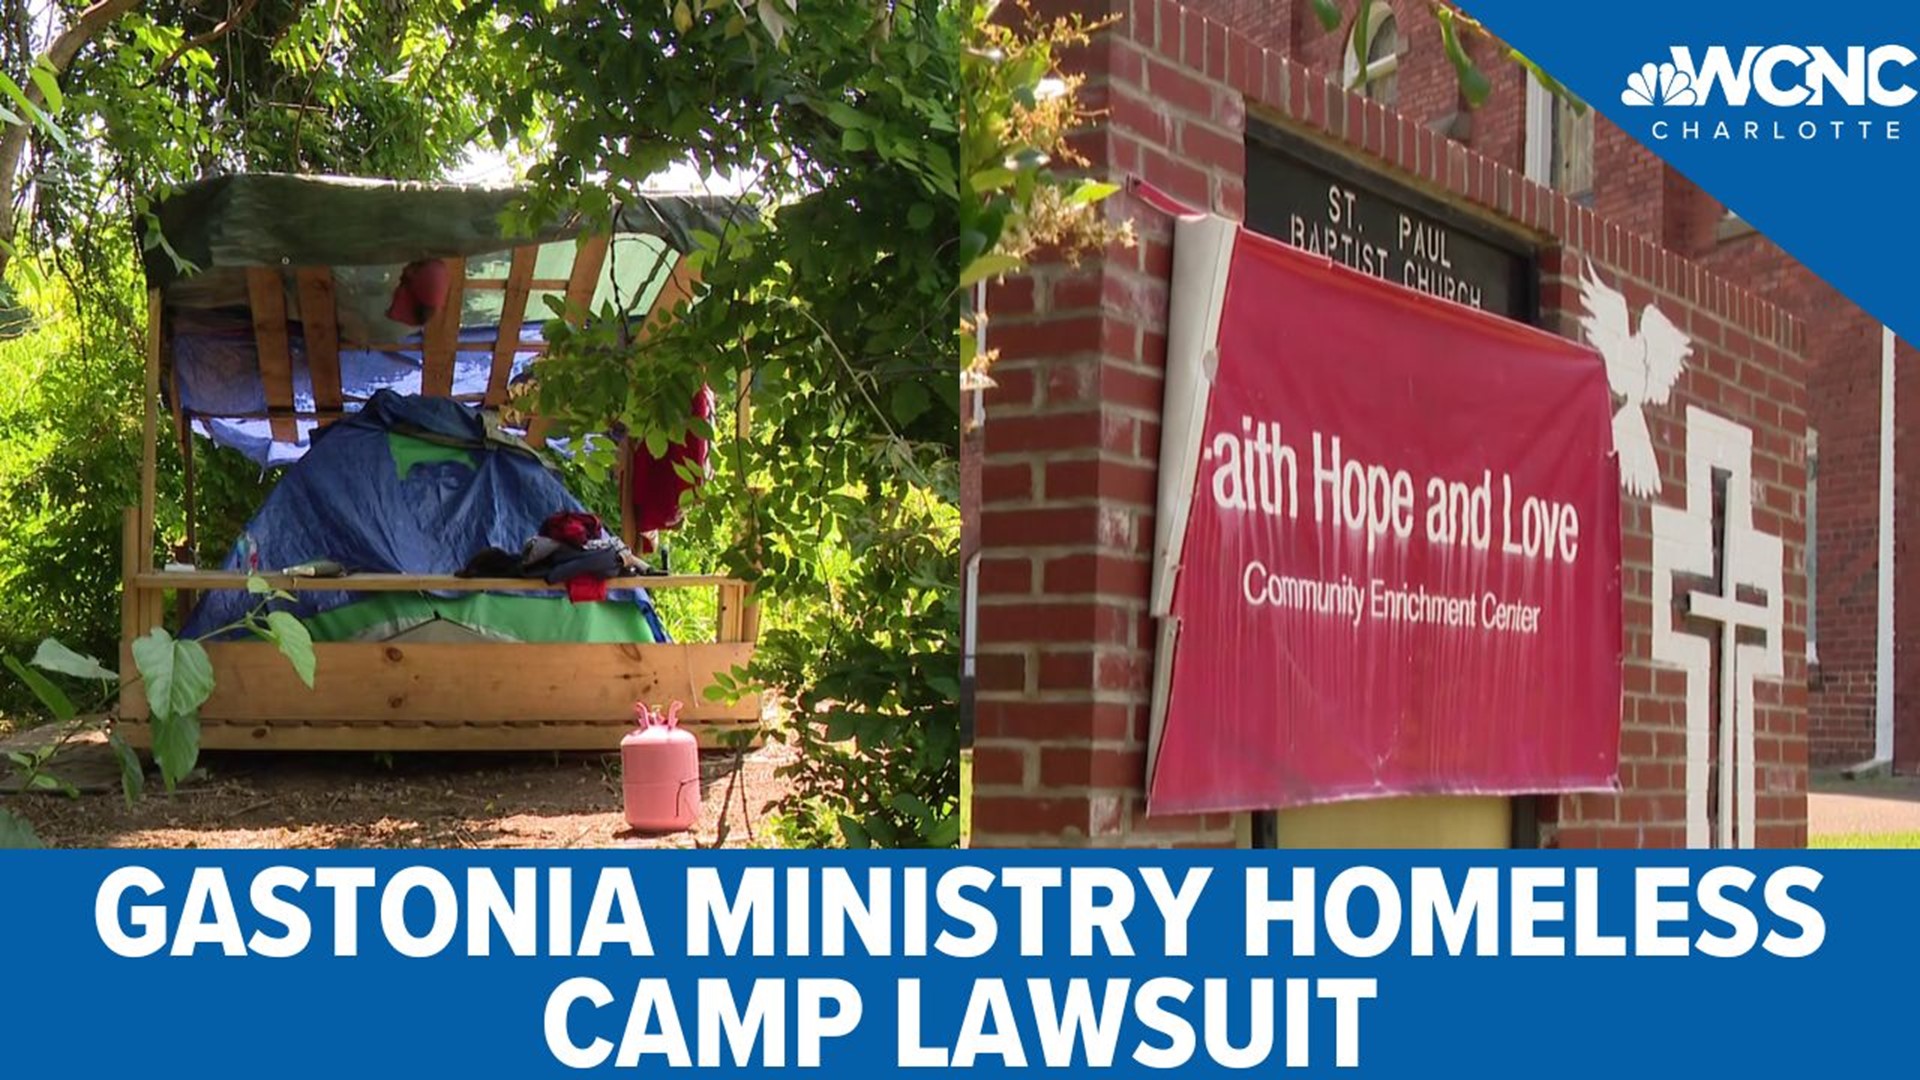 The City of Gastonia is suing Faith, Hope & Love Community Enrichment Ministries for failing to comply with local ordinances.